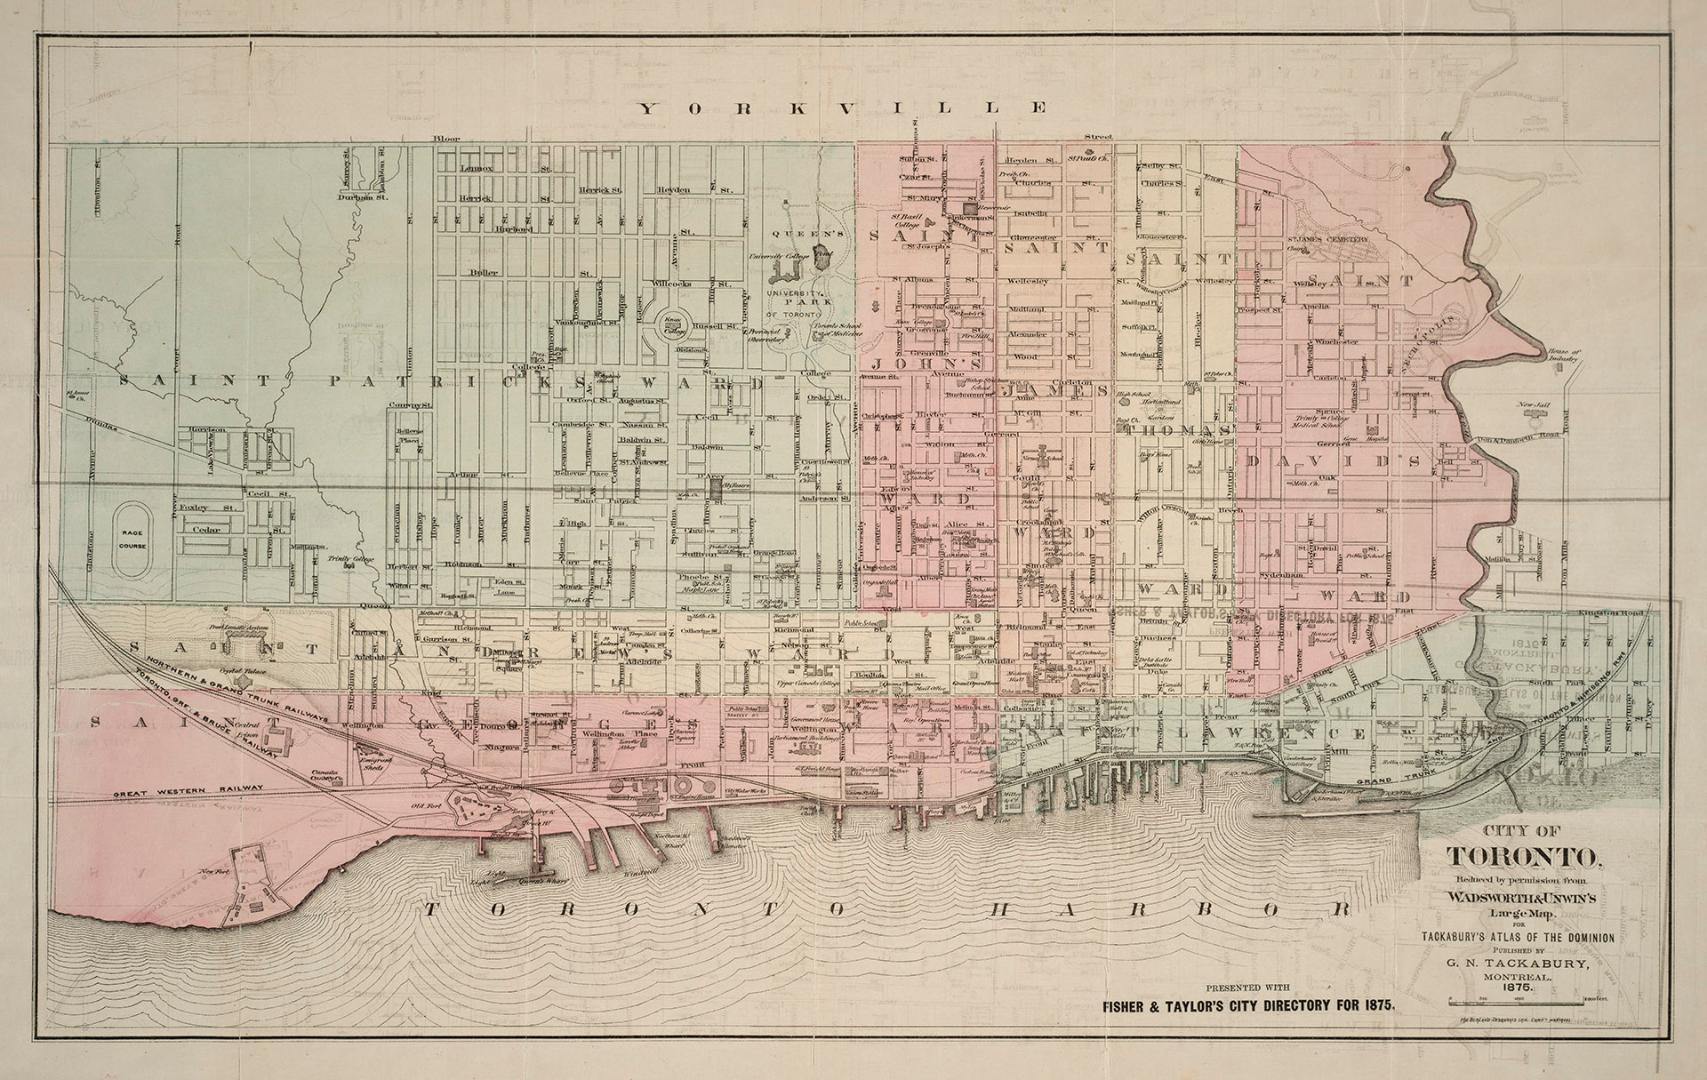 City of Toronto, reduced by permission from Wadsworth & Unwin's large map for Tackabury's Atlas of the Dominion